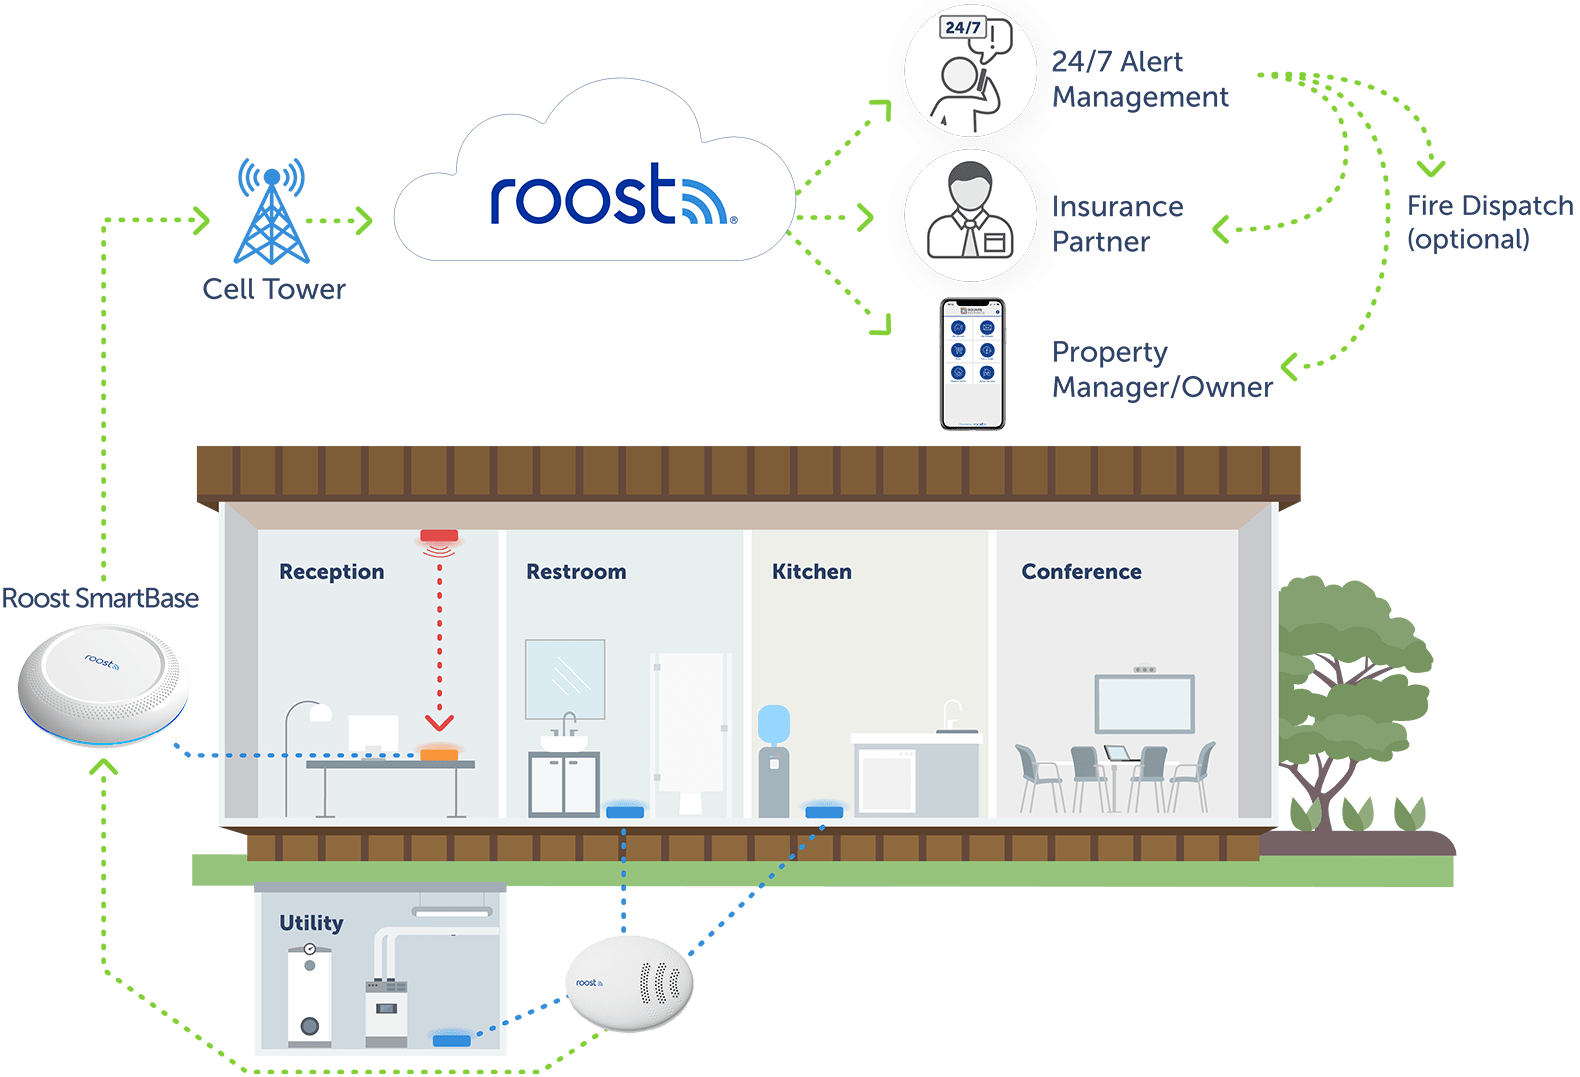 Roost Commercial Property Insurance Solution Roost Home Telematics